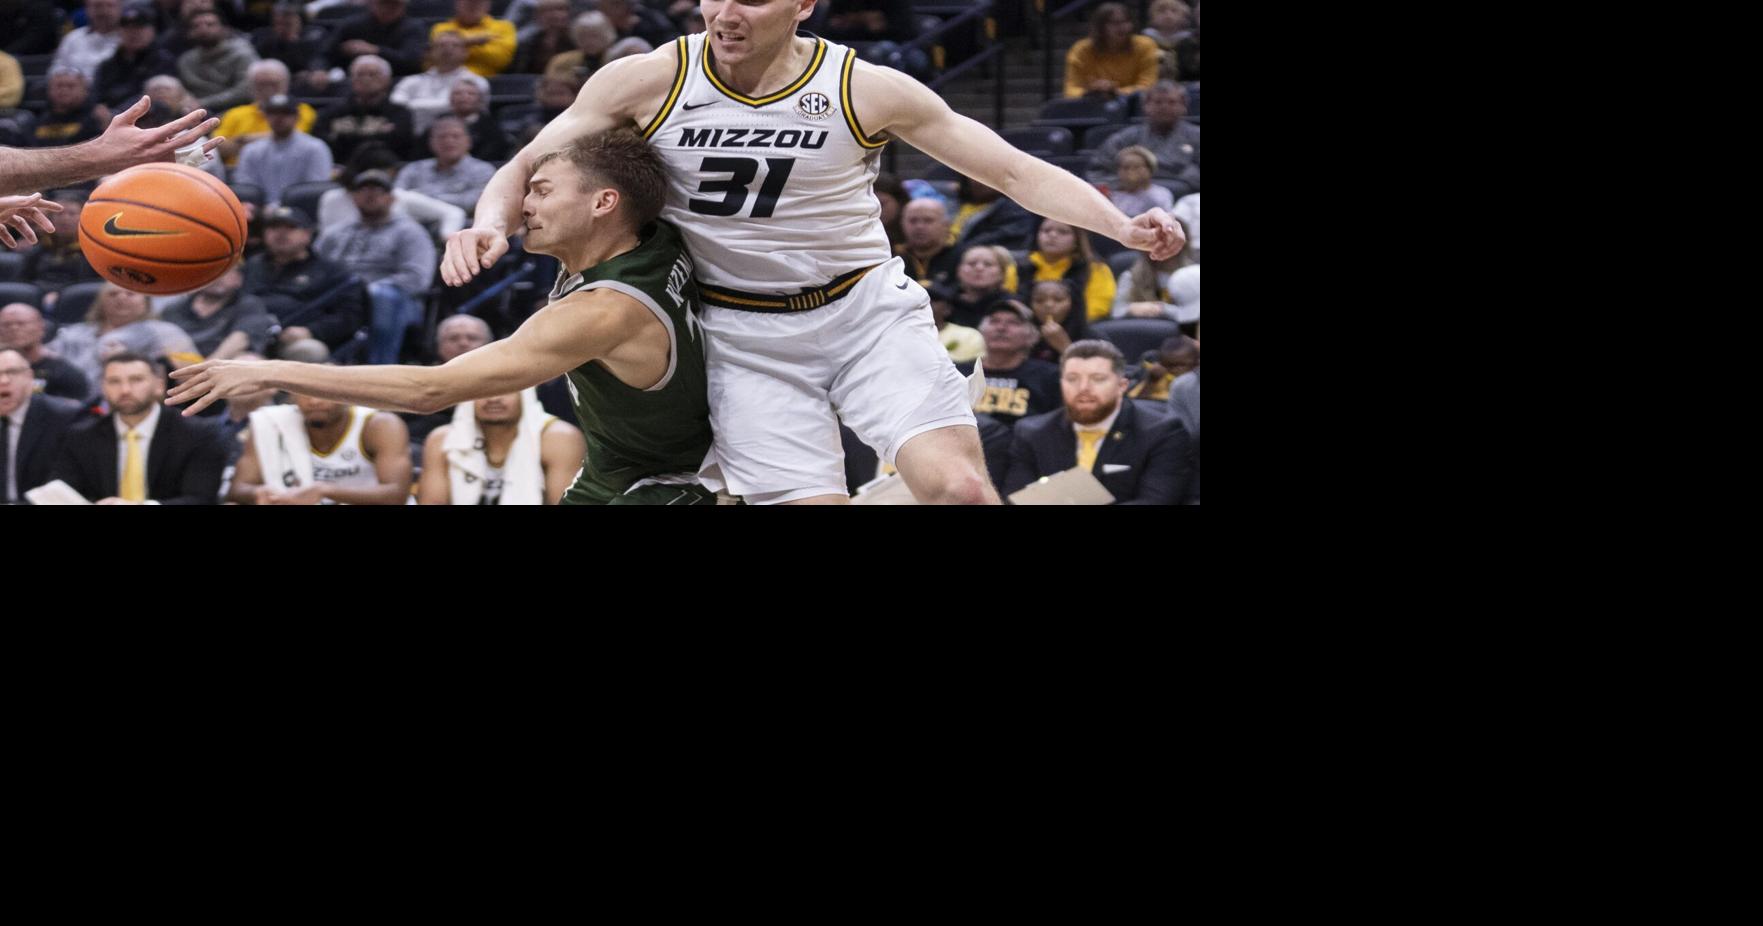 Mizzou guard Caleb Grill out with wrist injury